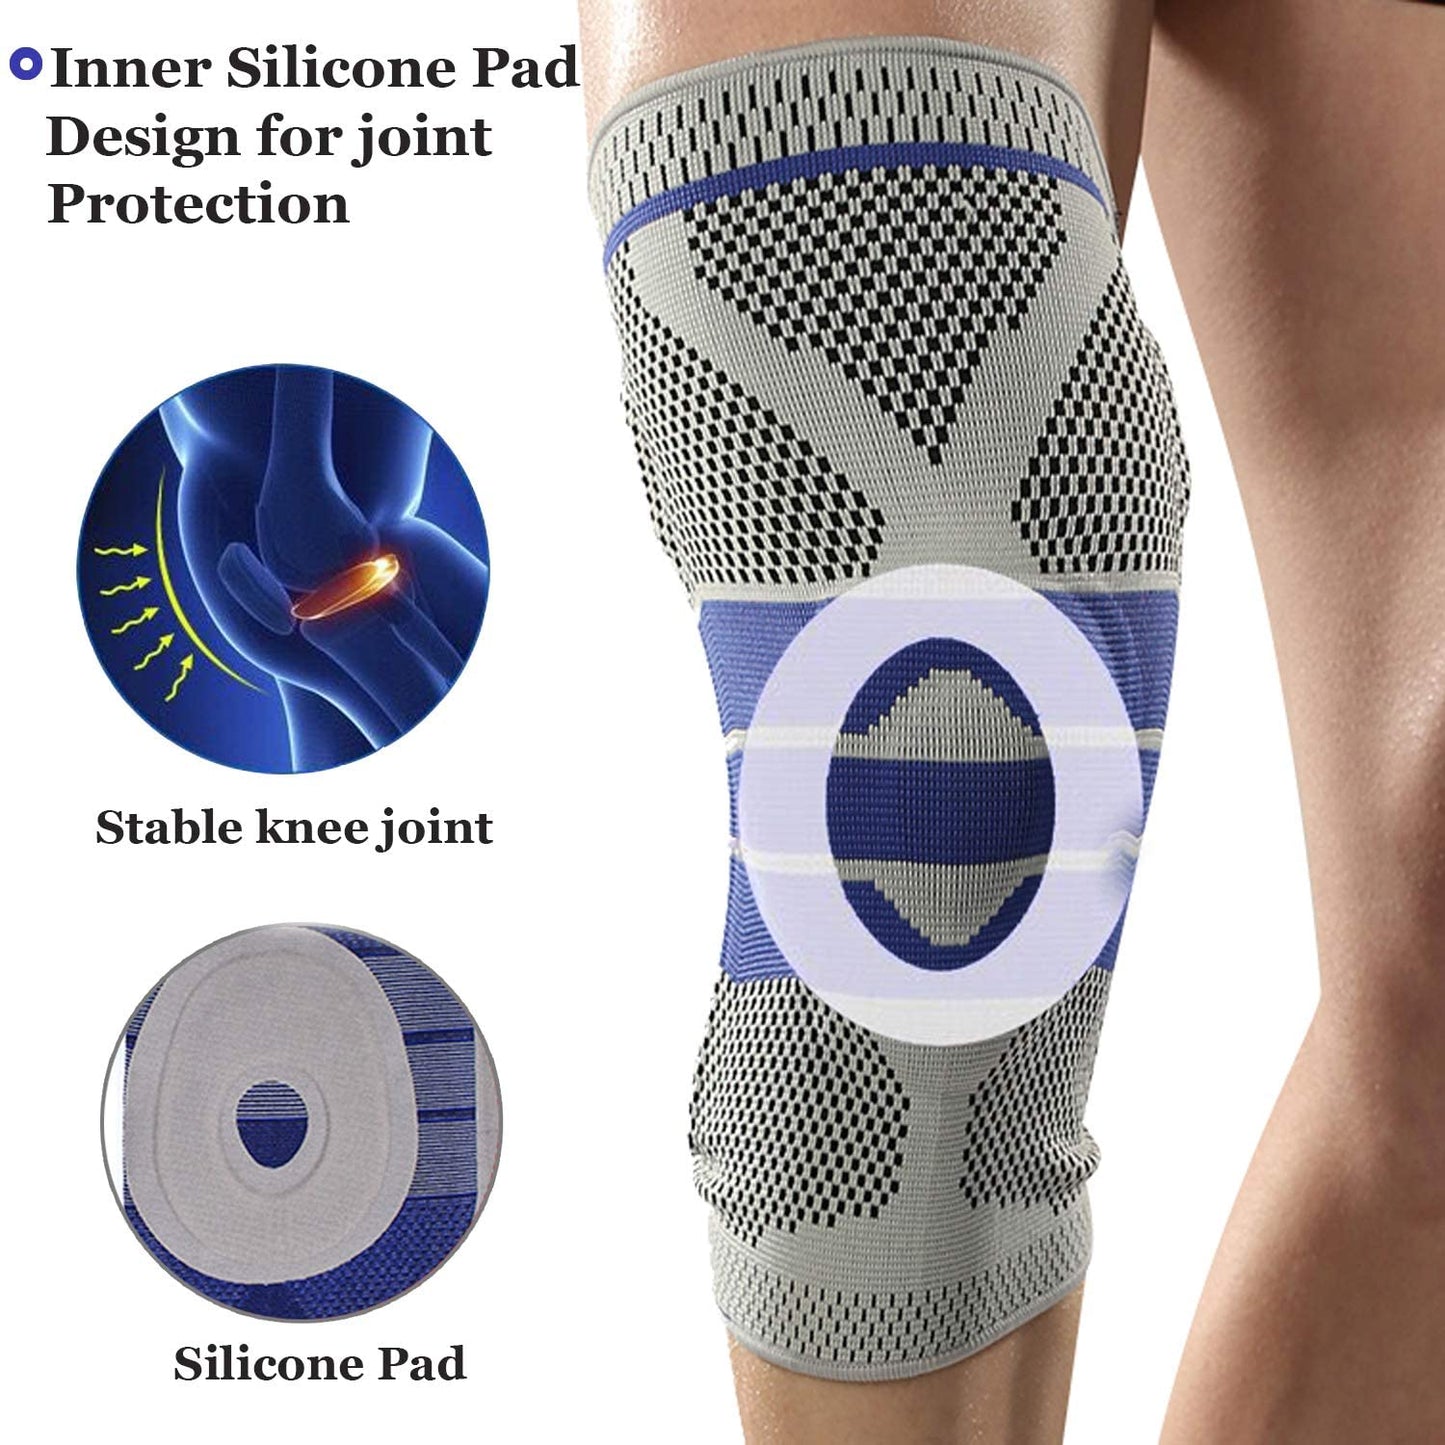 Compression Knee Sleeve - Best Knee Brace for Meniscus Tear and